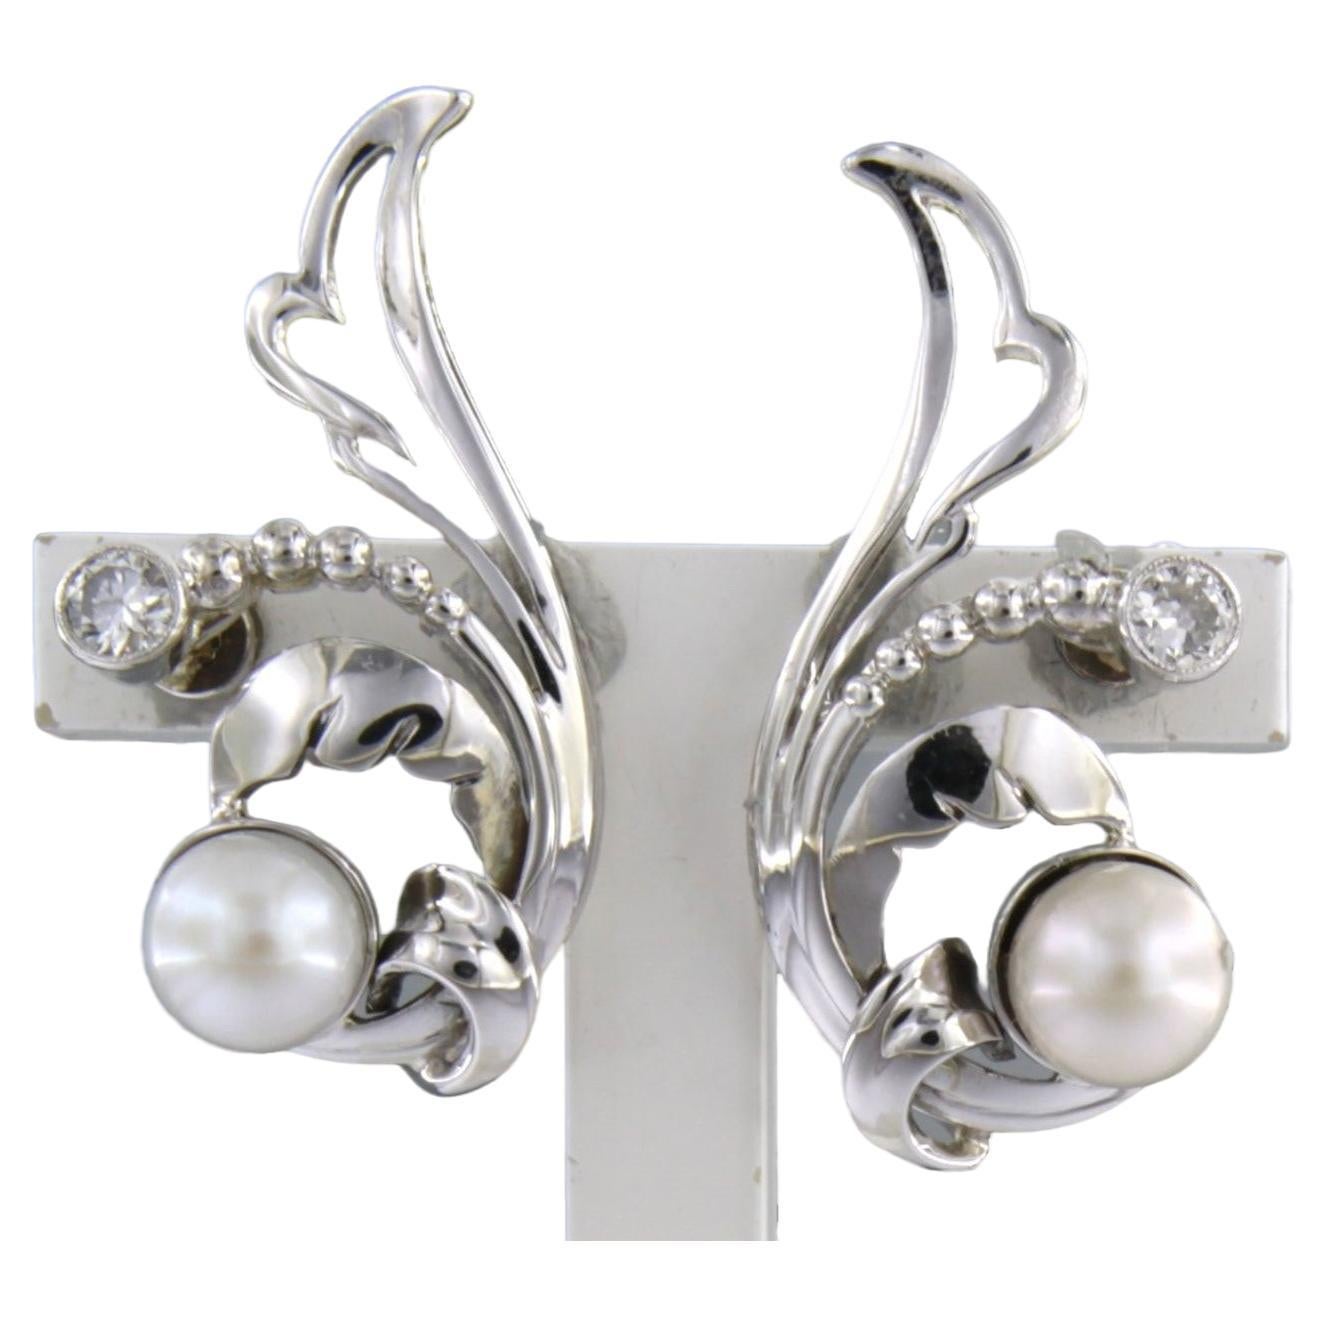 14k white gold stud earrings set with pearl and brilliant cut diamonds. 0.15ct - I/J - SI

detailed description:

the front of the stud is 2.4 cm long by 1.1 cm wide

weight 5.3 grams

set with

- 2 x 5.3 mm freshwater pearl

colour White
purity